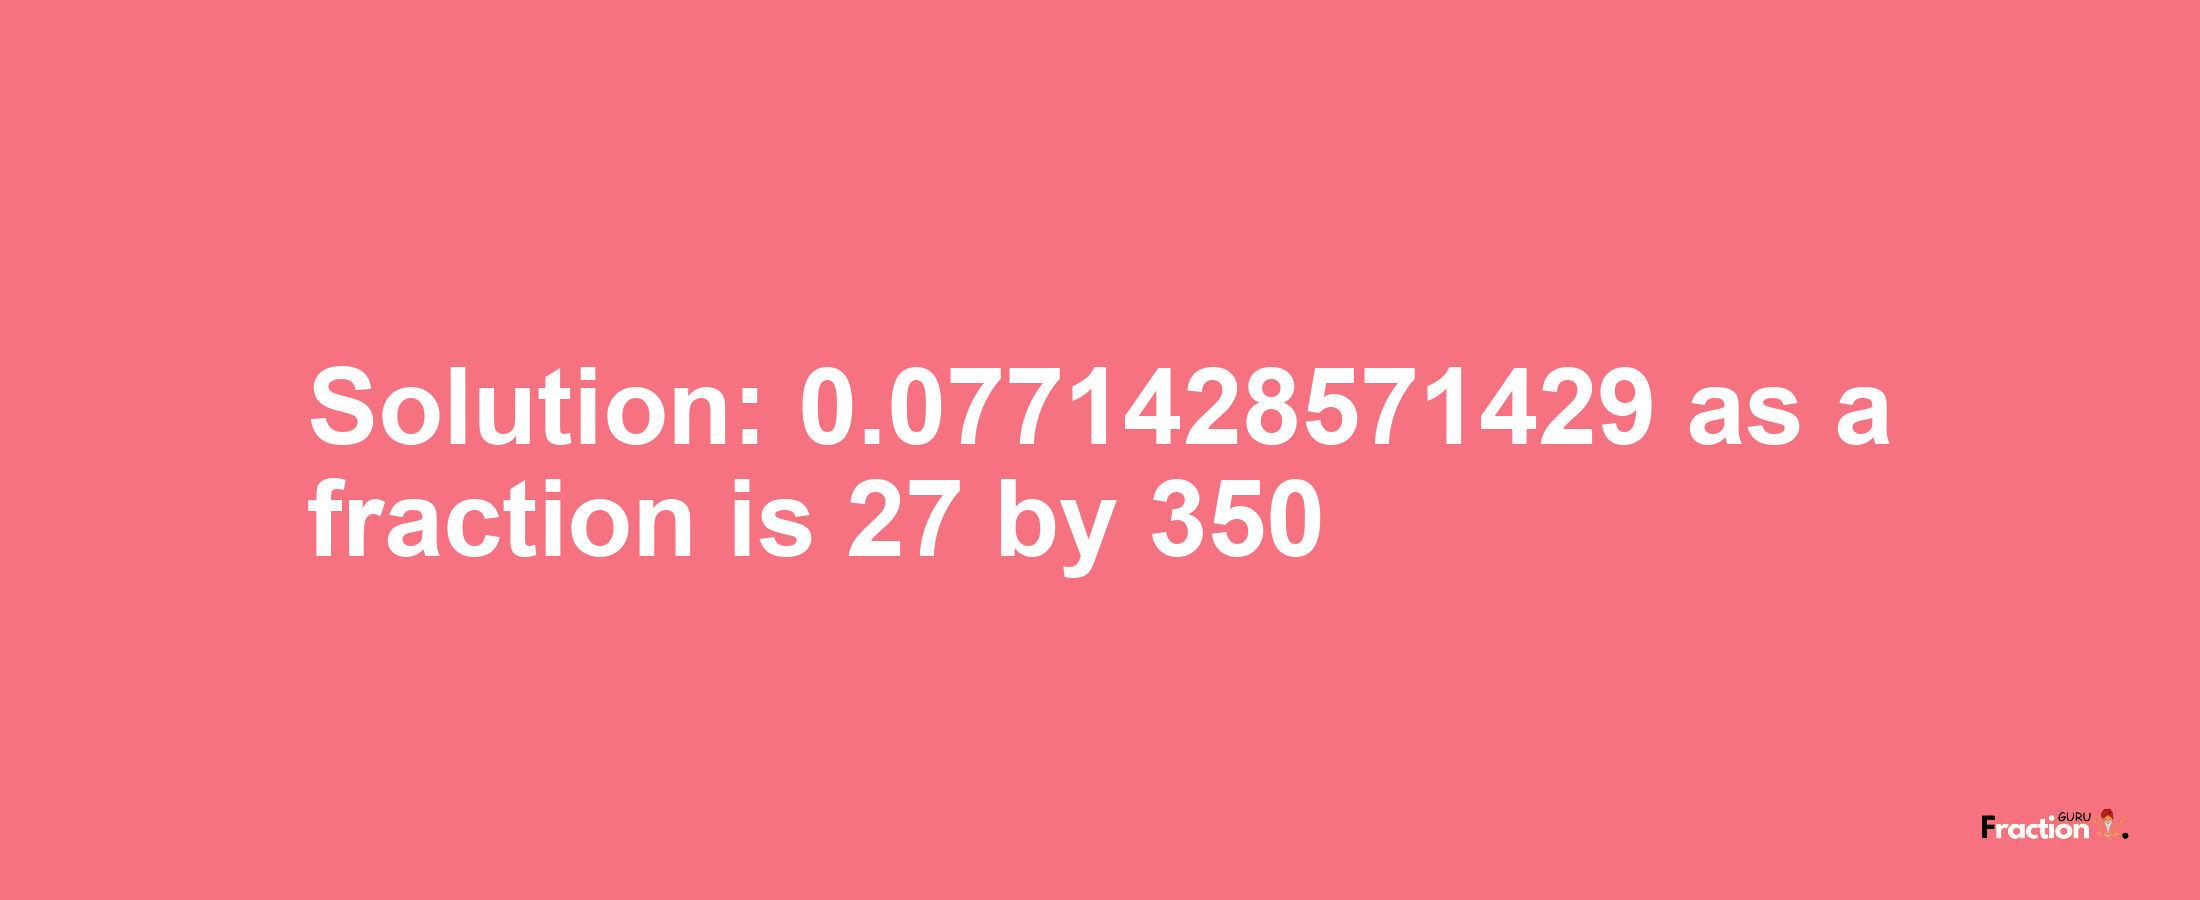 Solution:0.0771428571429 as a fraction is 27/350